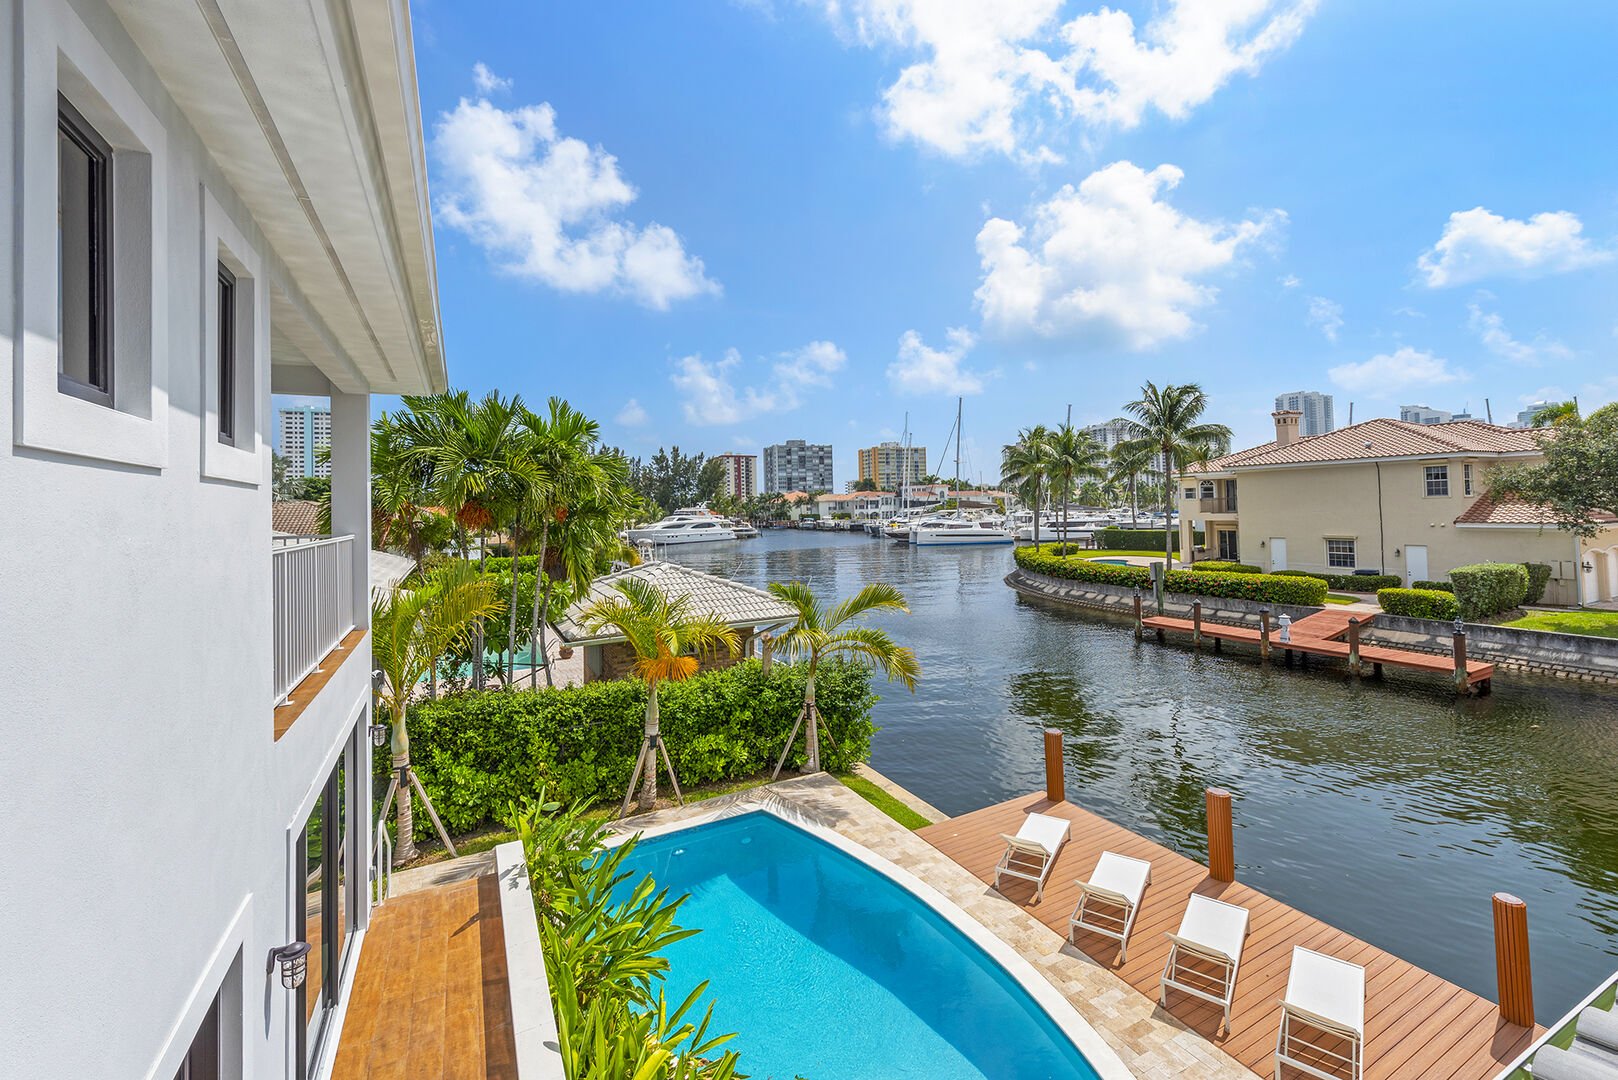 The balcony off the third bedroom showcases canal views just off the Intracoastal waterway.